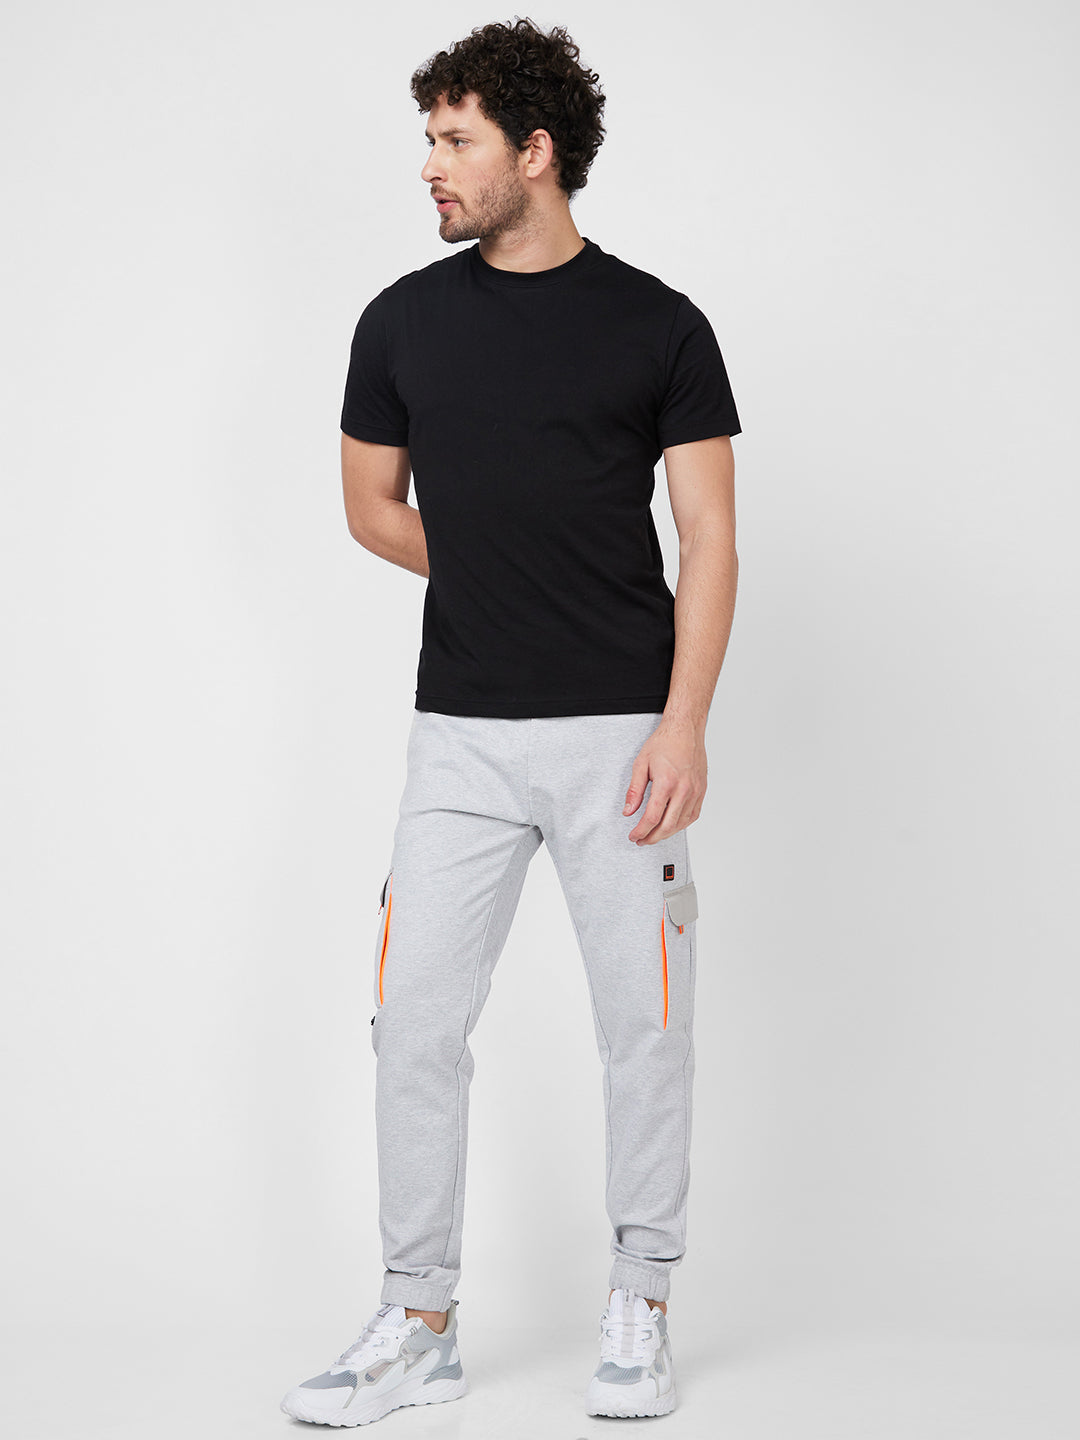 Spykar Ankle Length Mid Rise Grey Trackpant For Men